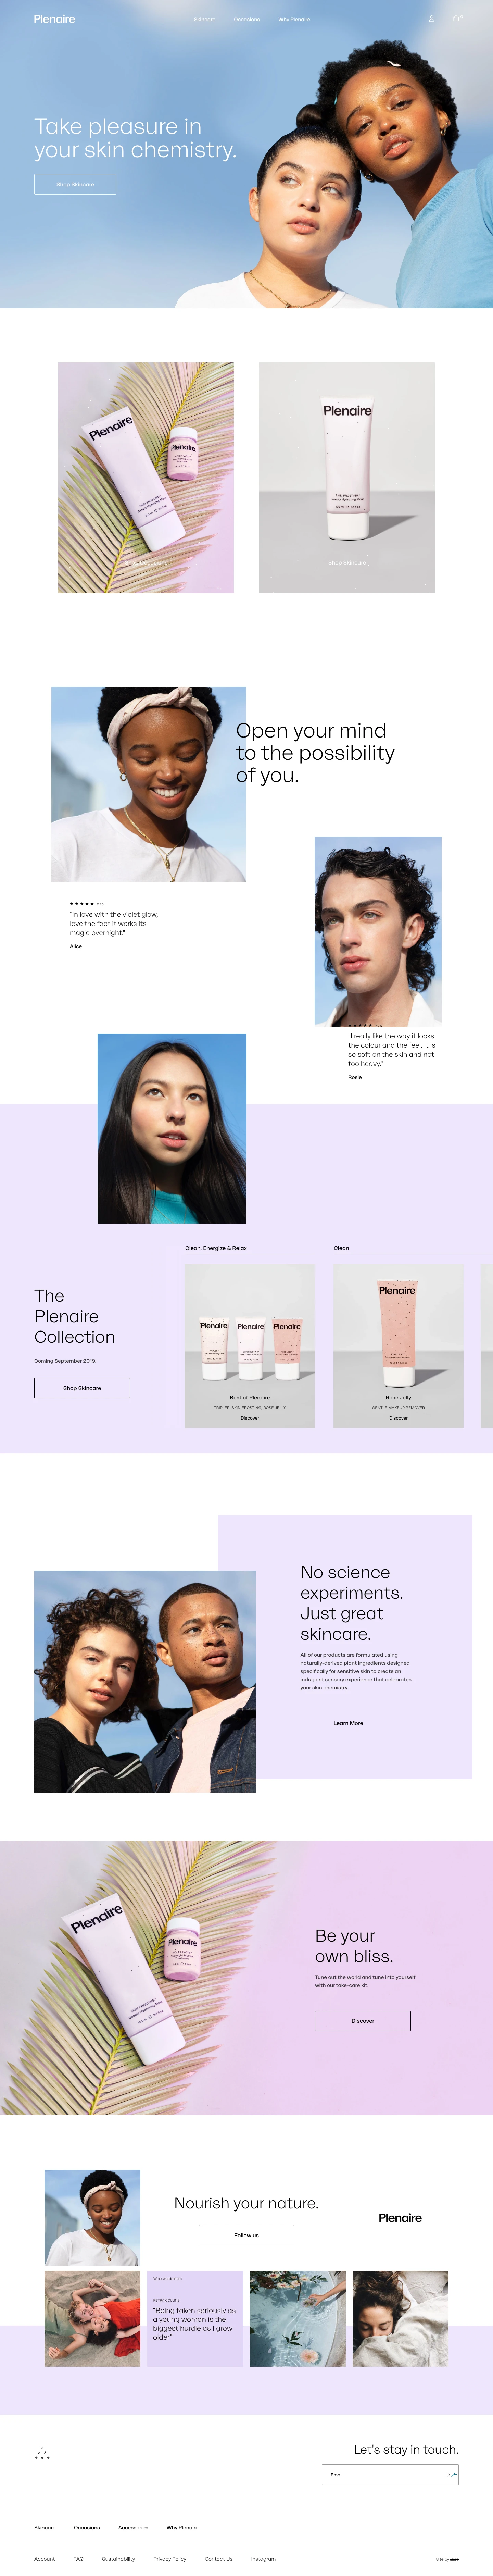 Plenaire Landing Page Example: Take pleasure in your skin chemistry. Skincare essentials that are as gentle as they are effective.